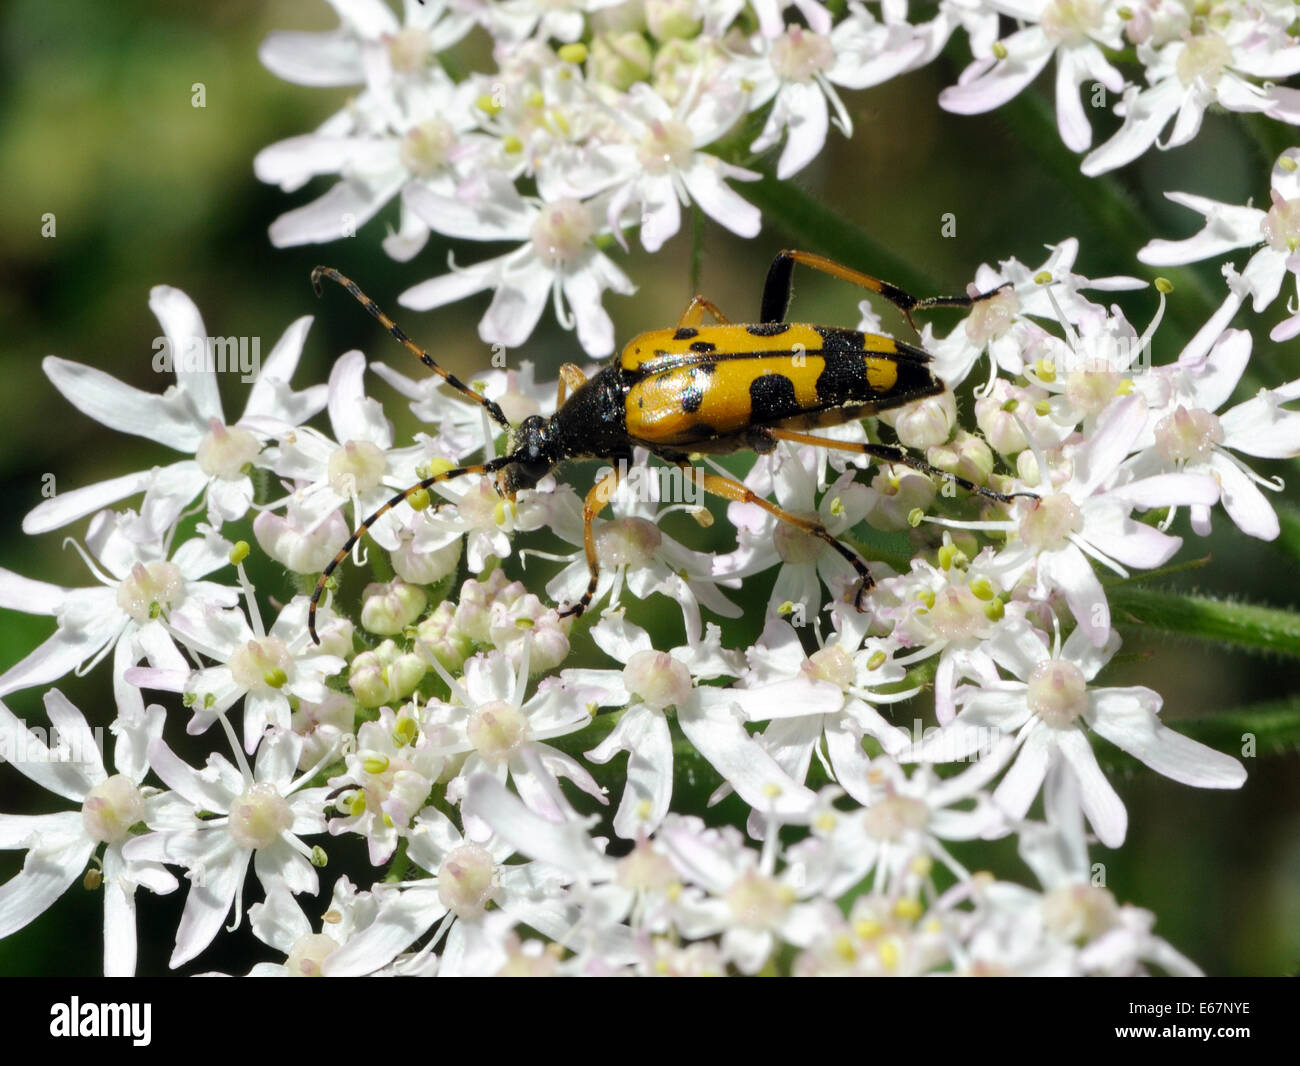 An orange and black long horn beetle (Rutpela maculate) feeds on a cow parsley (Anthriscus sylvestris) flower head. Bedgebury Forest, Kent, UK. Stock Photo